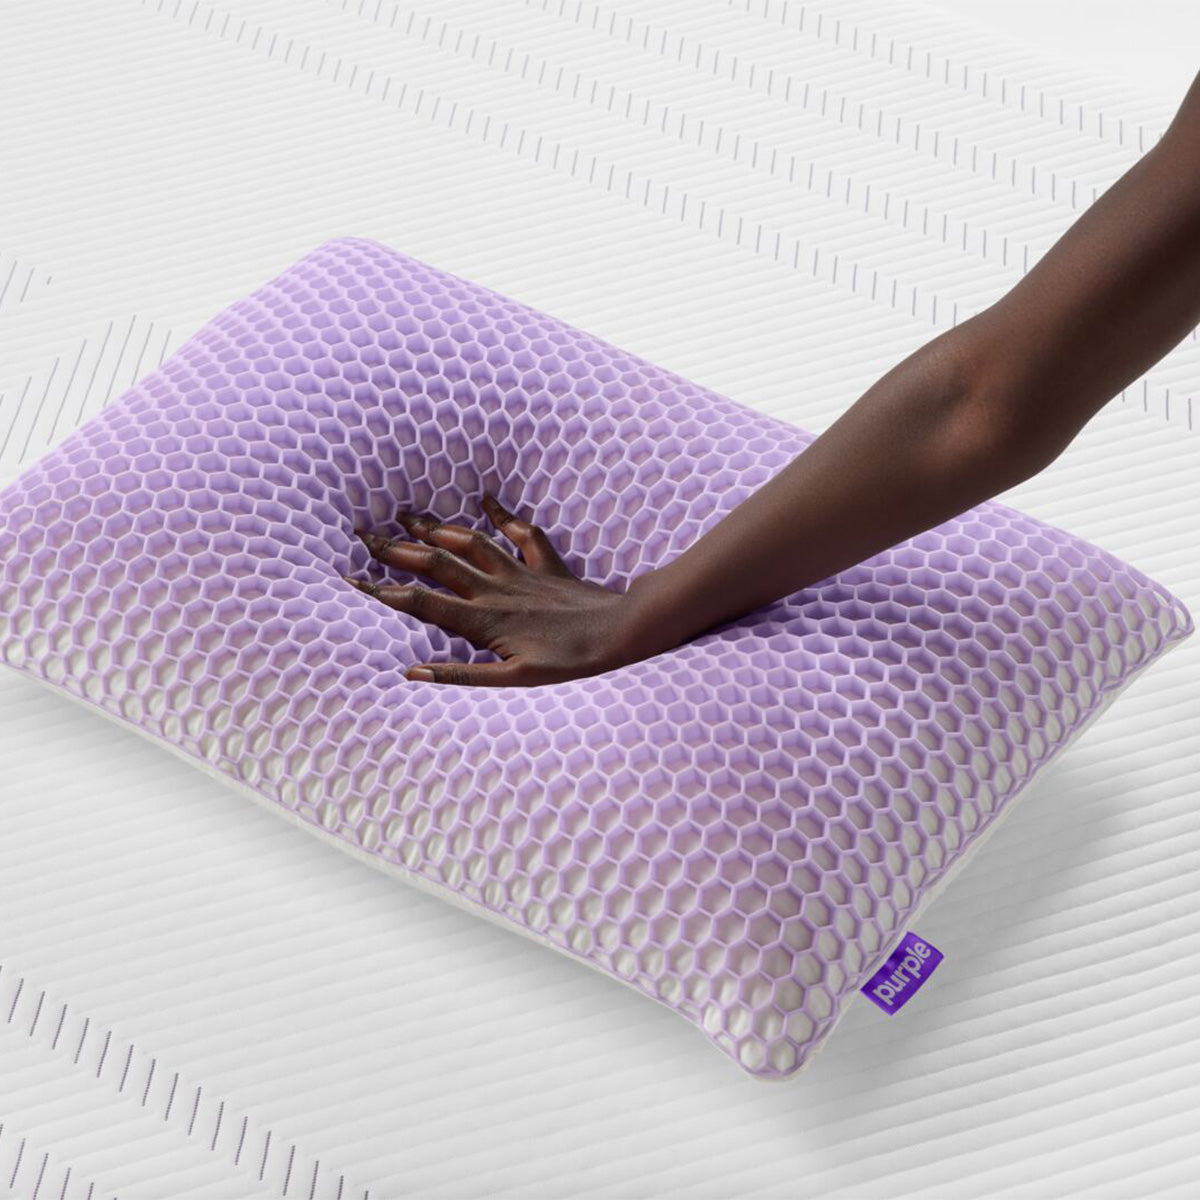 Hand Pressing Into Purple Harmony Pillow Uncovered To Show The GelFlex Grid